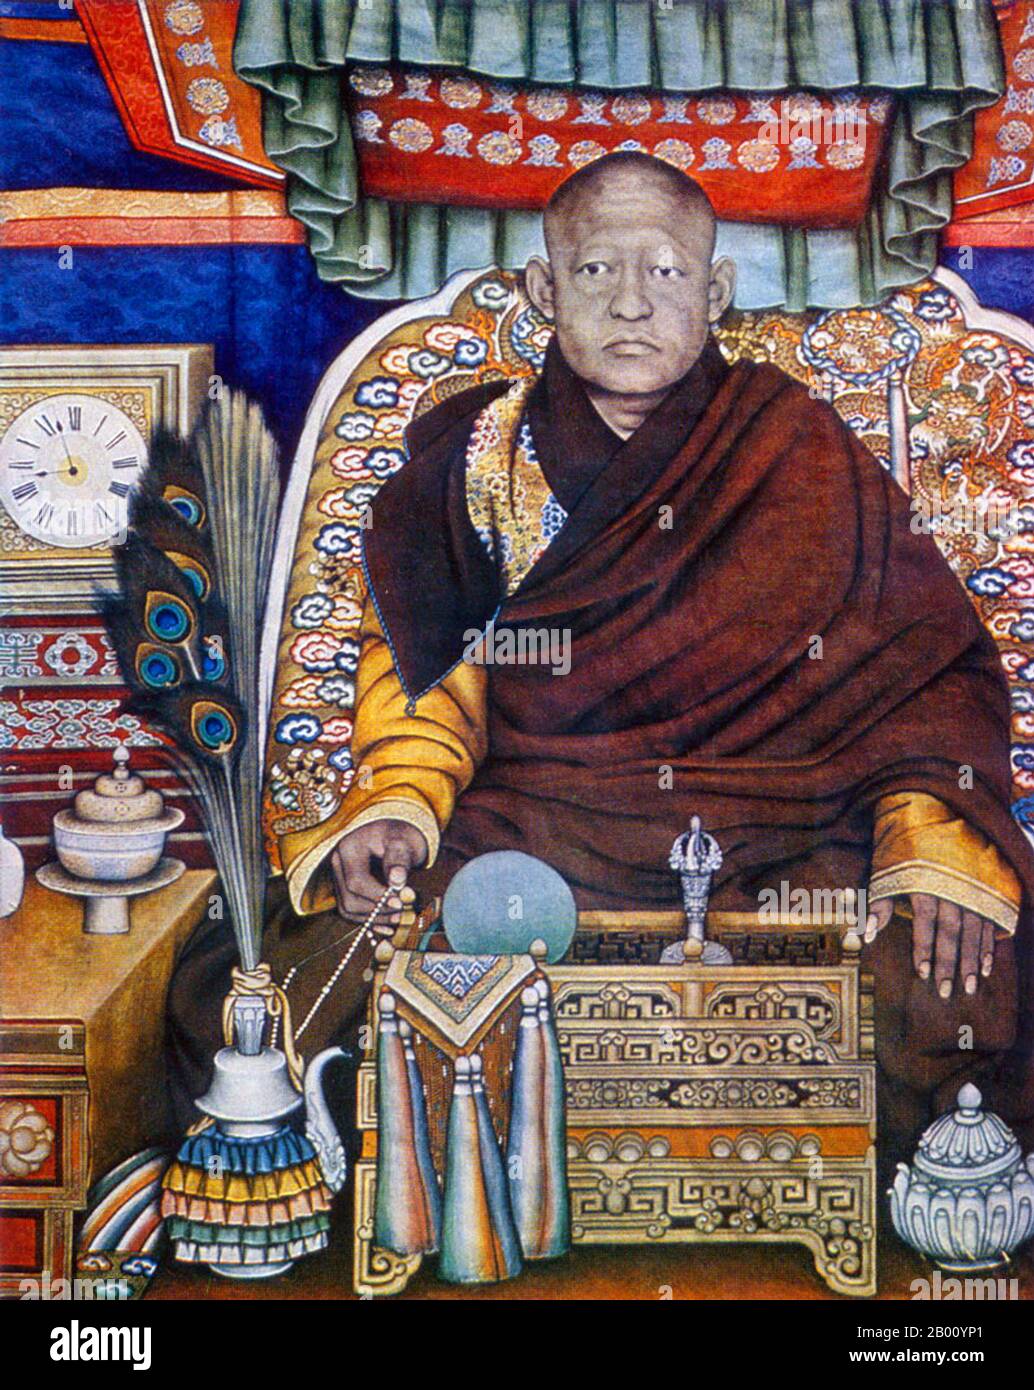 Mongolia: The Eighth Jebtsundamba Khutugtu Bogd Khan, last monarchic ruler of Mongolia. Painting by Marzan Sharav (1869-1939), 1924.  The Bogd Khan (c. 1869 - 20 May 1924) was simultaneously the religious and secular head of the Mongolian state until the 1920s. Ikh Huree, as Ulan Bator was then known, was the seat of the preeminent living Buddha of Mongolia (the Jebtsundamba Khutuktu, also known as the Bogdo Gegen and later as Bogd Khan), who ranked third in the Lamaist-Buddhist ecclesiastical hierarchy, after the Dalai Lama and the Panchen Lama. Stock Photo